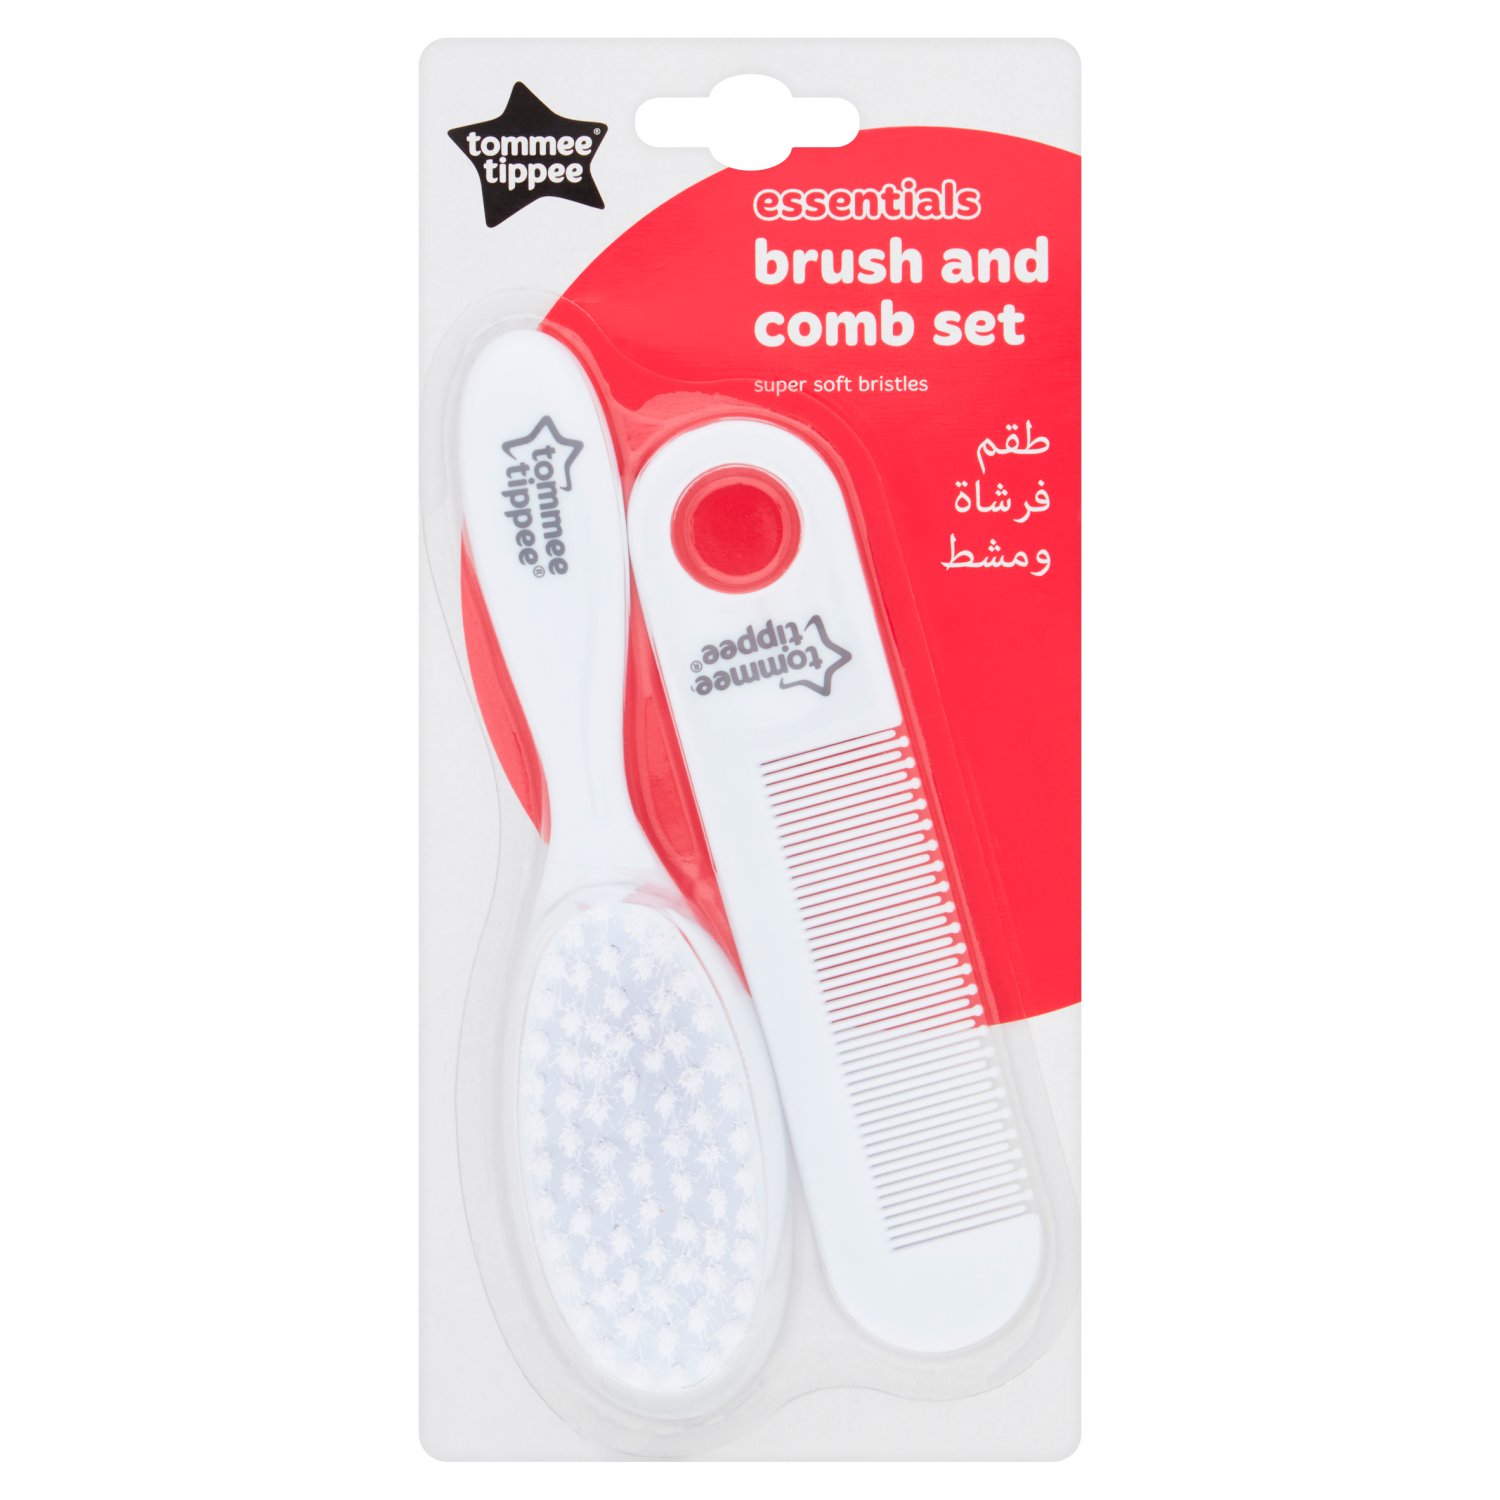 Tommee Tippee Essentials Brush And Comb Set (1 Piece)